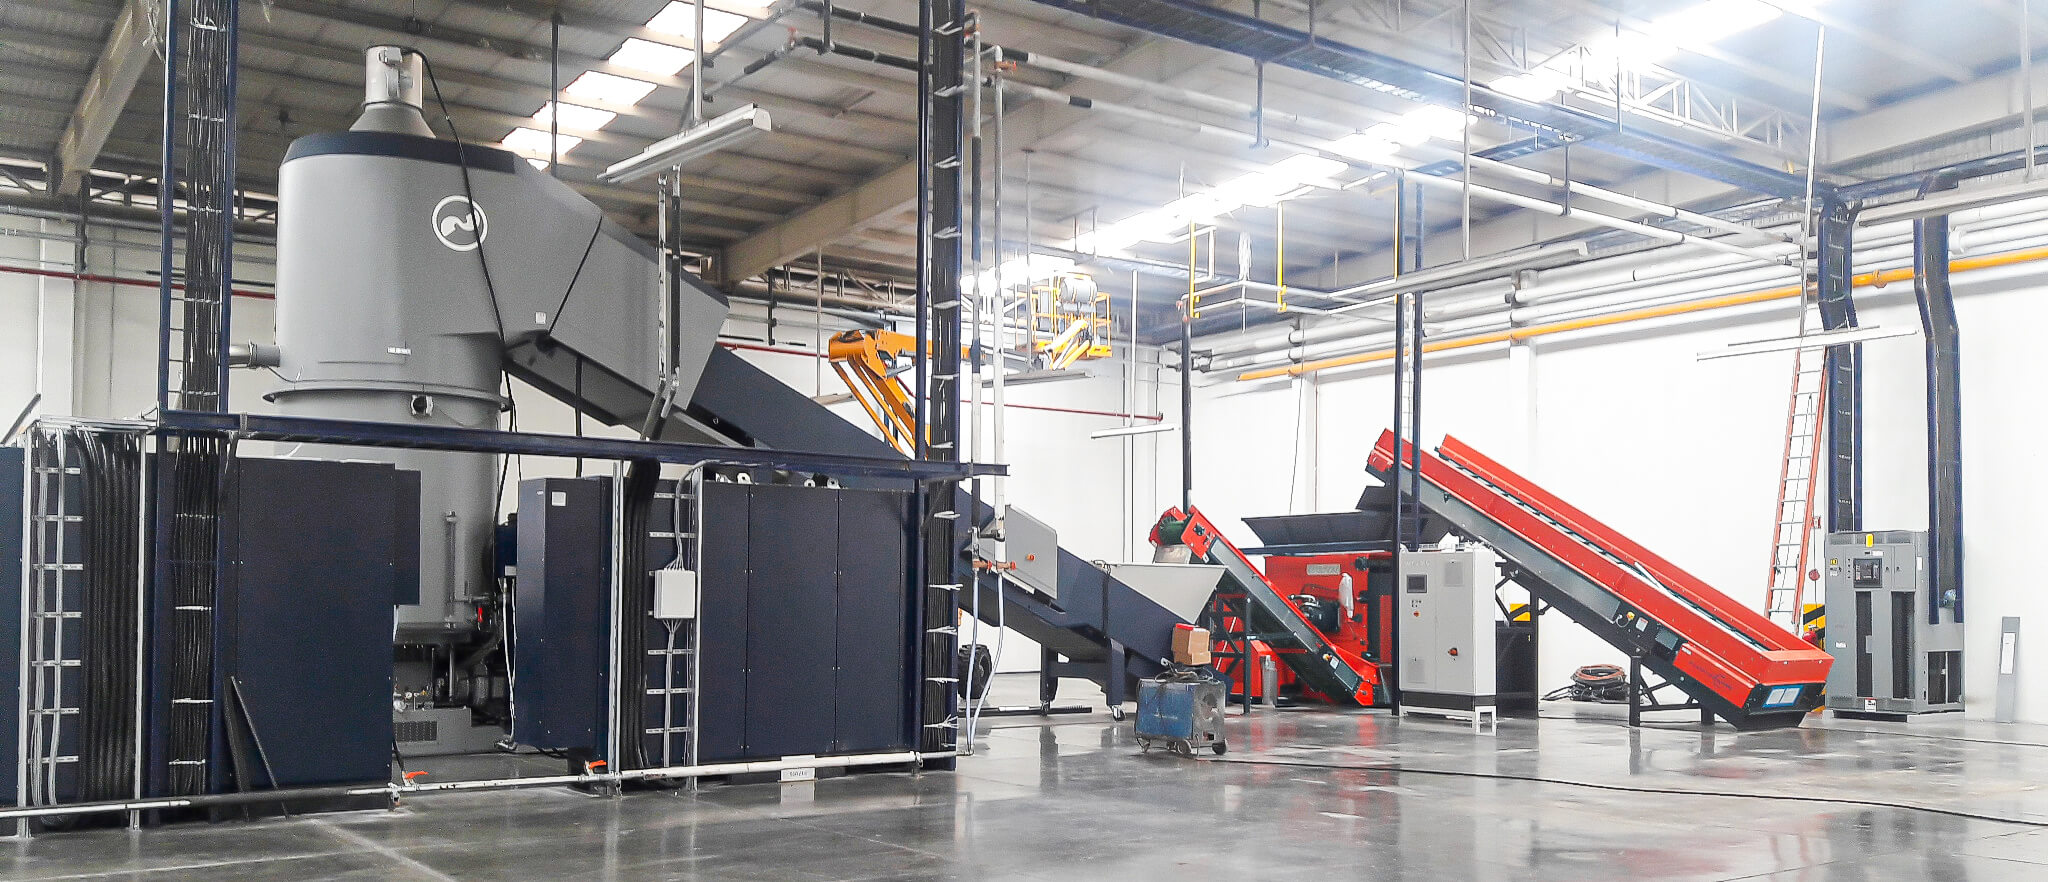 Metal shredders from WEIMA are ideal for effortless metal recycling